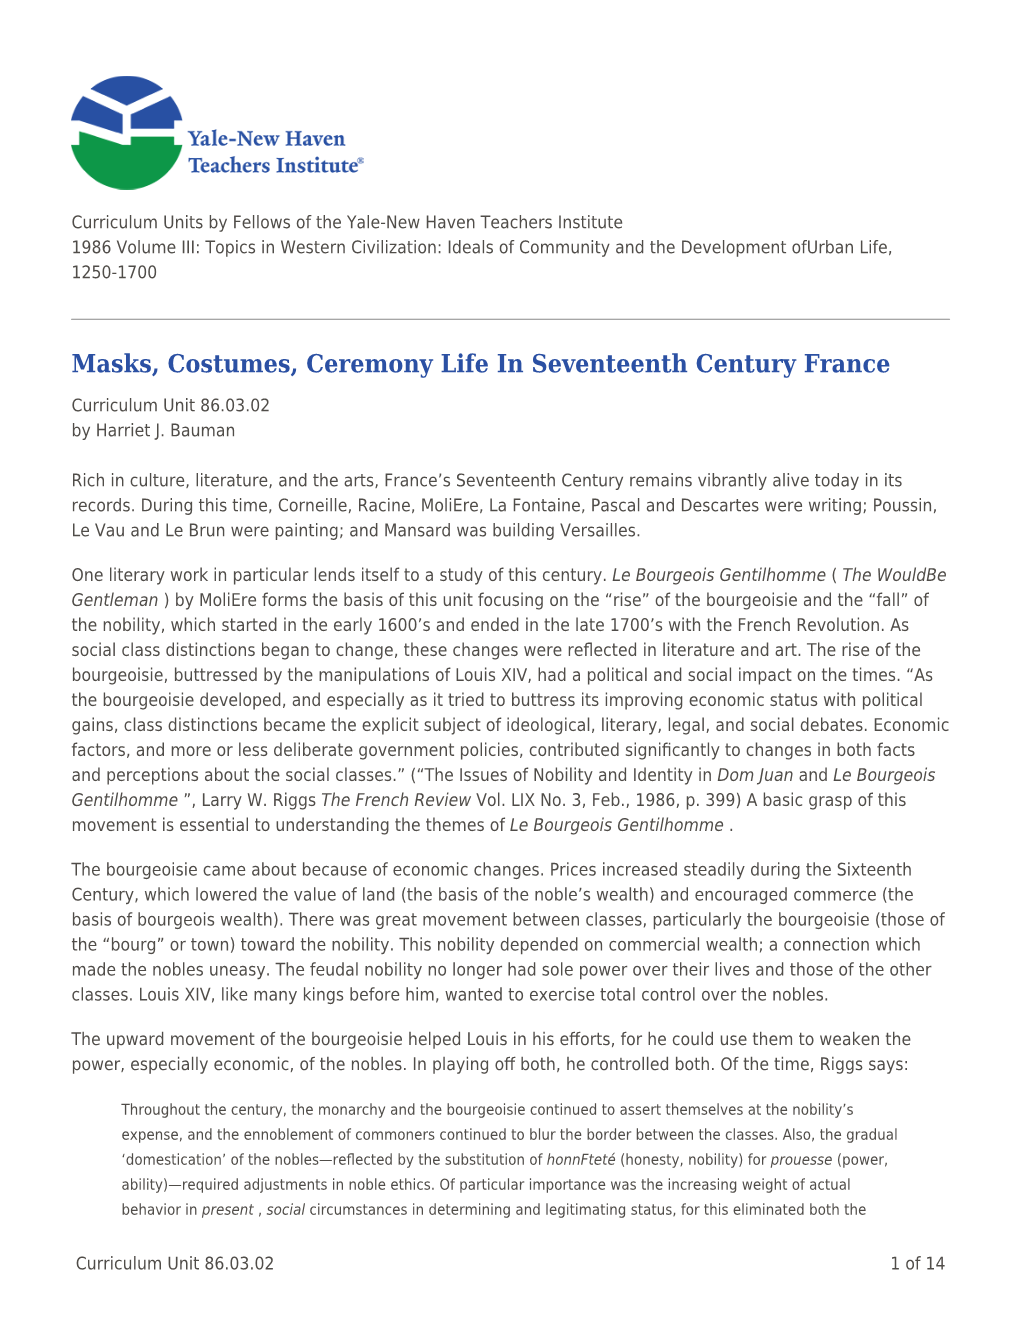 Masks, Costumes, Ceremony Life in Seventeenth Century France